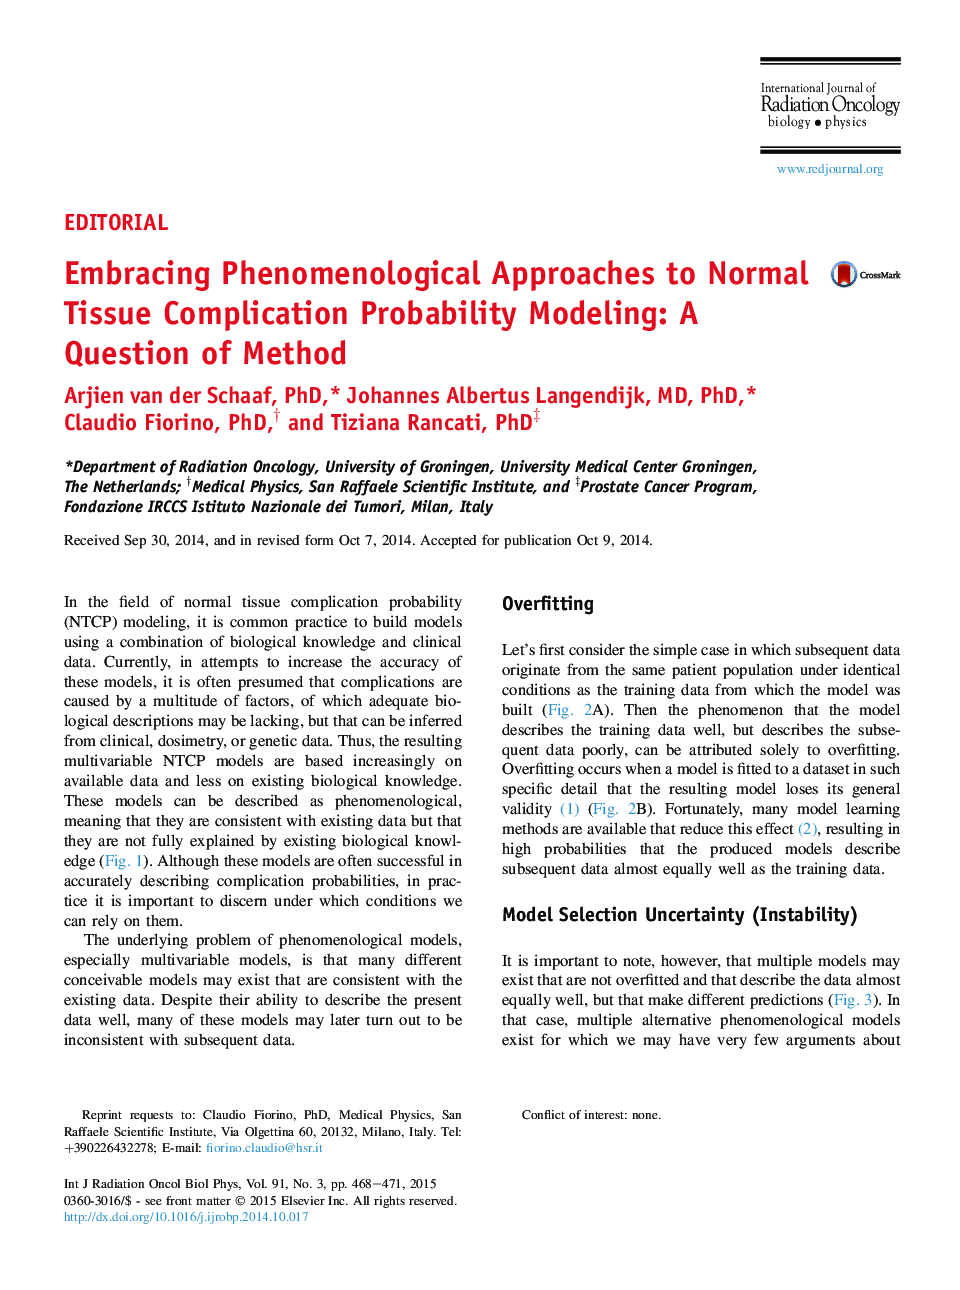 Embracing Phenomenological Approaches to Normal Tissue Complication Probability Modeling: A Question of Method